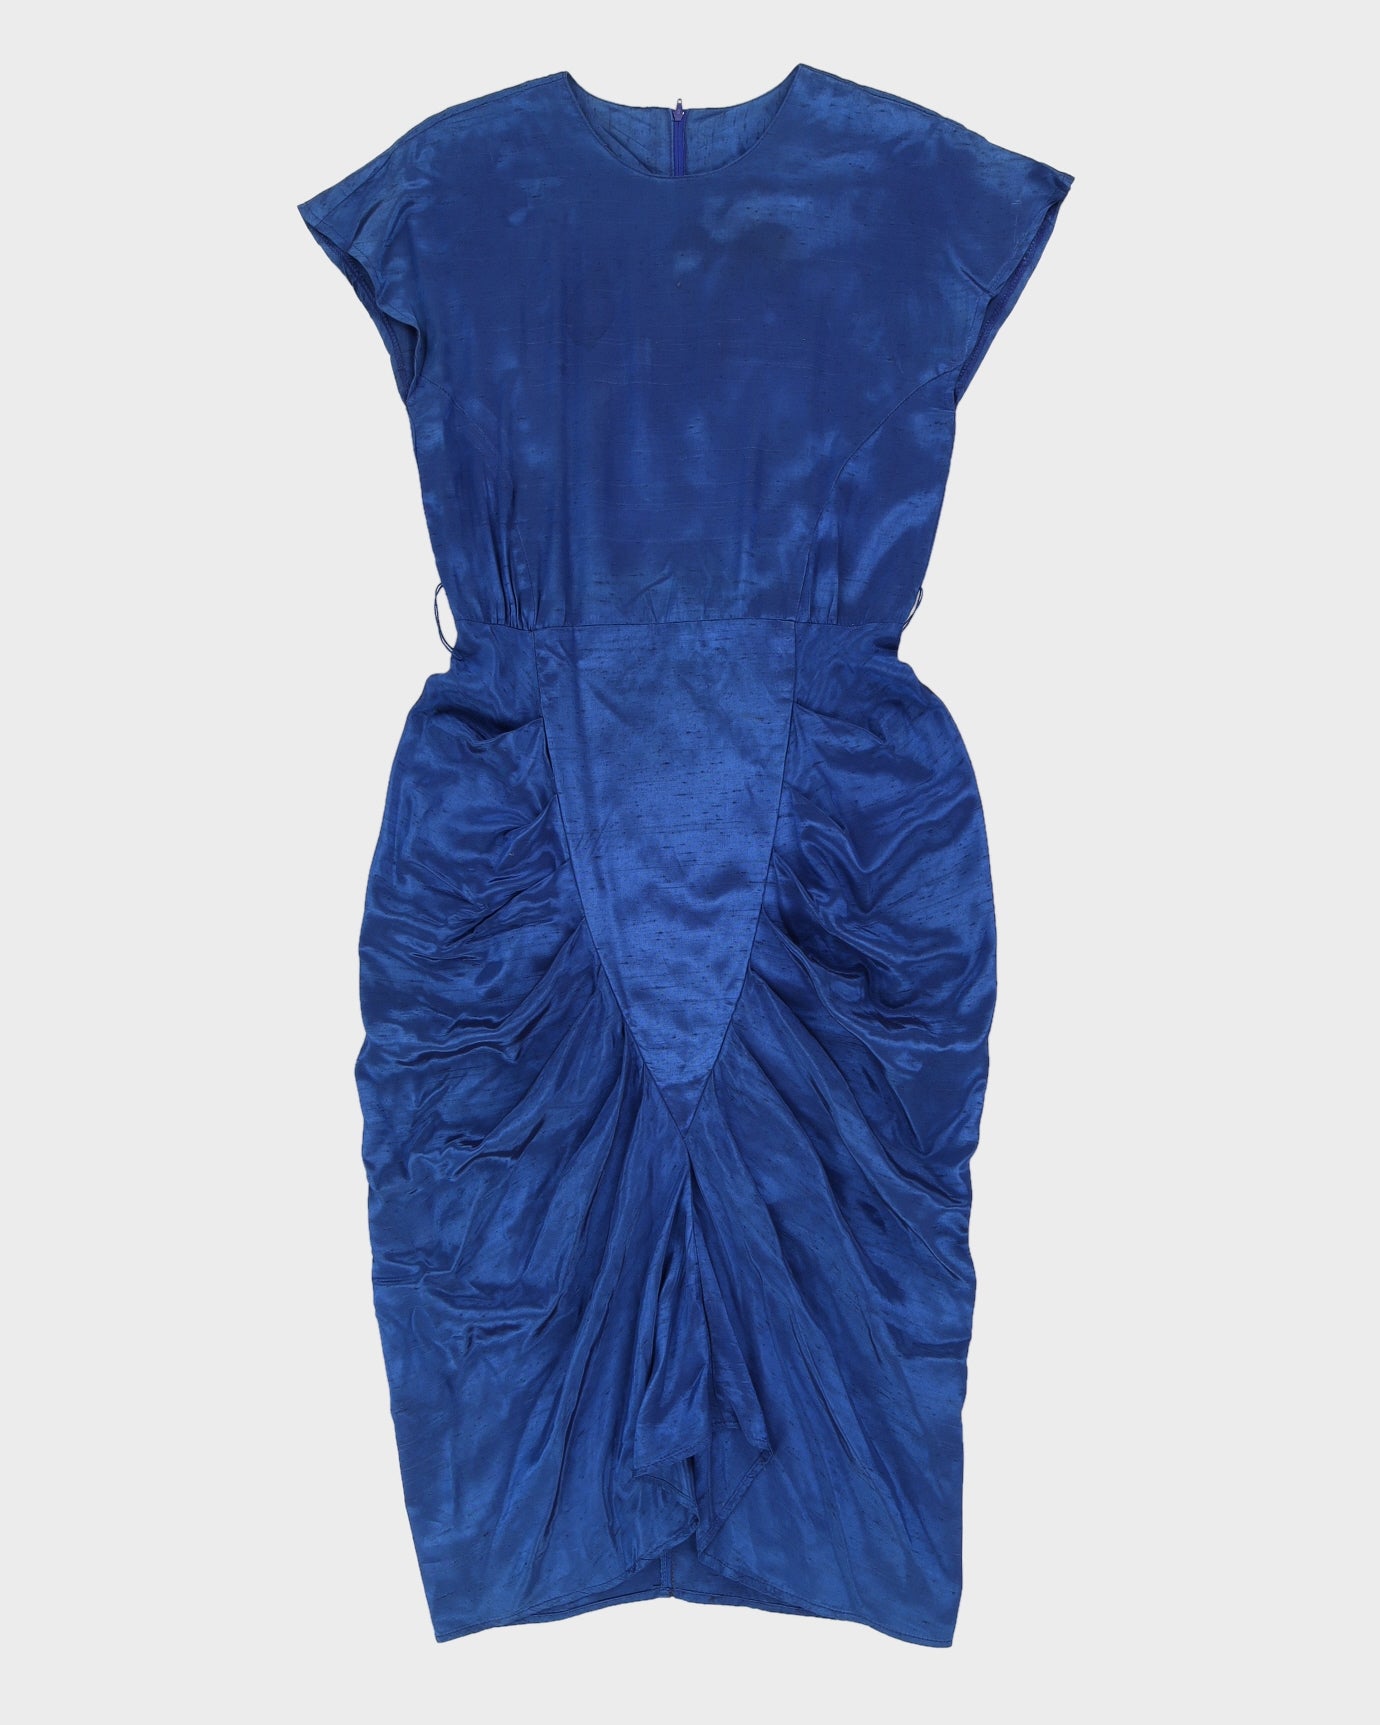 Blue 80s Ruched Dress - S